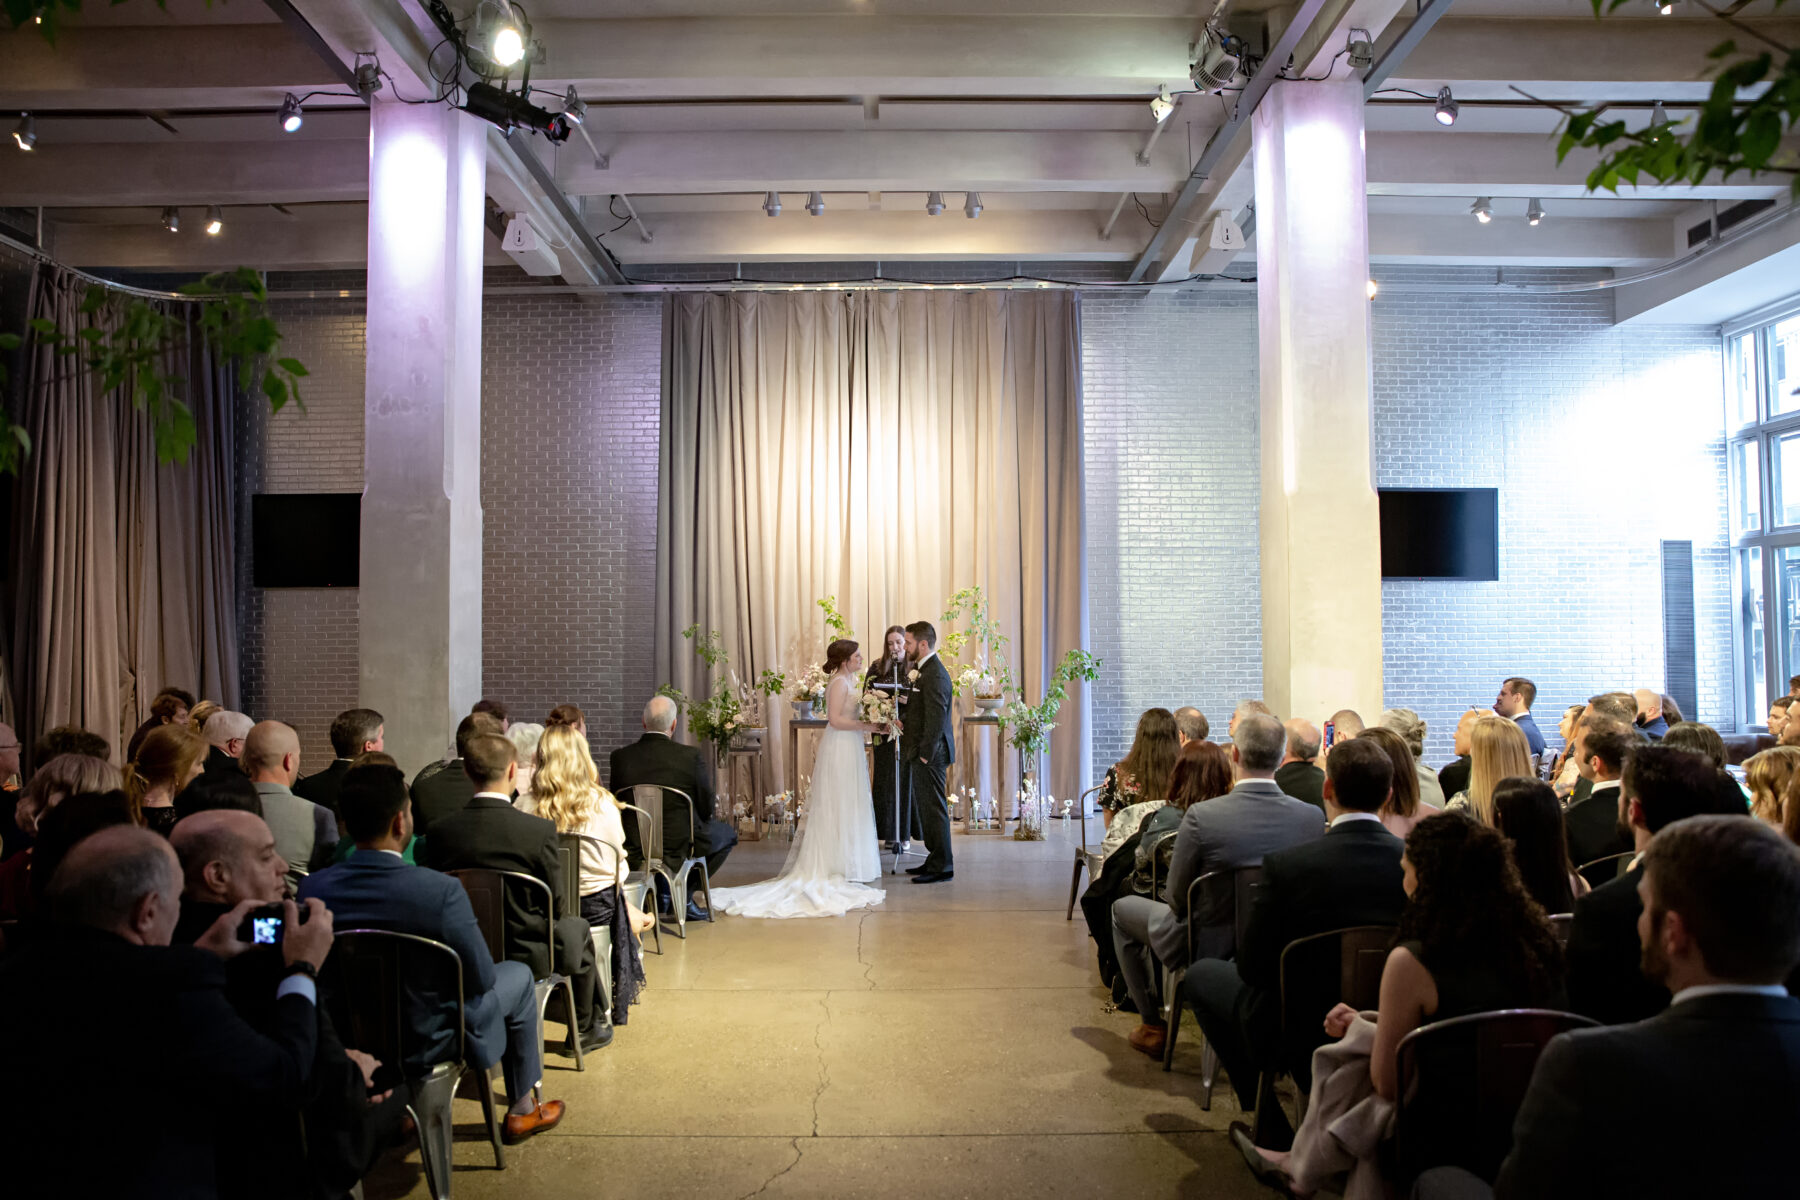 A wedding ceremony in the entrance space of The Andy Warhol Museum.